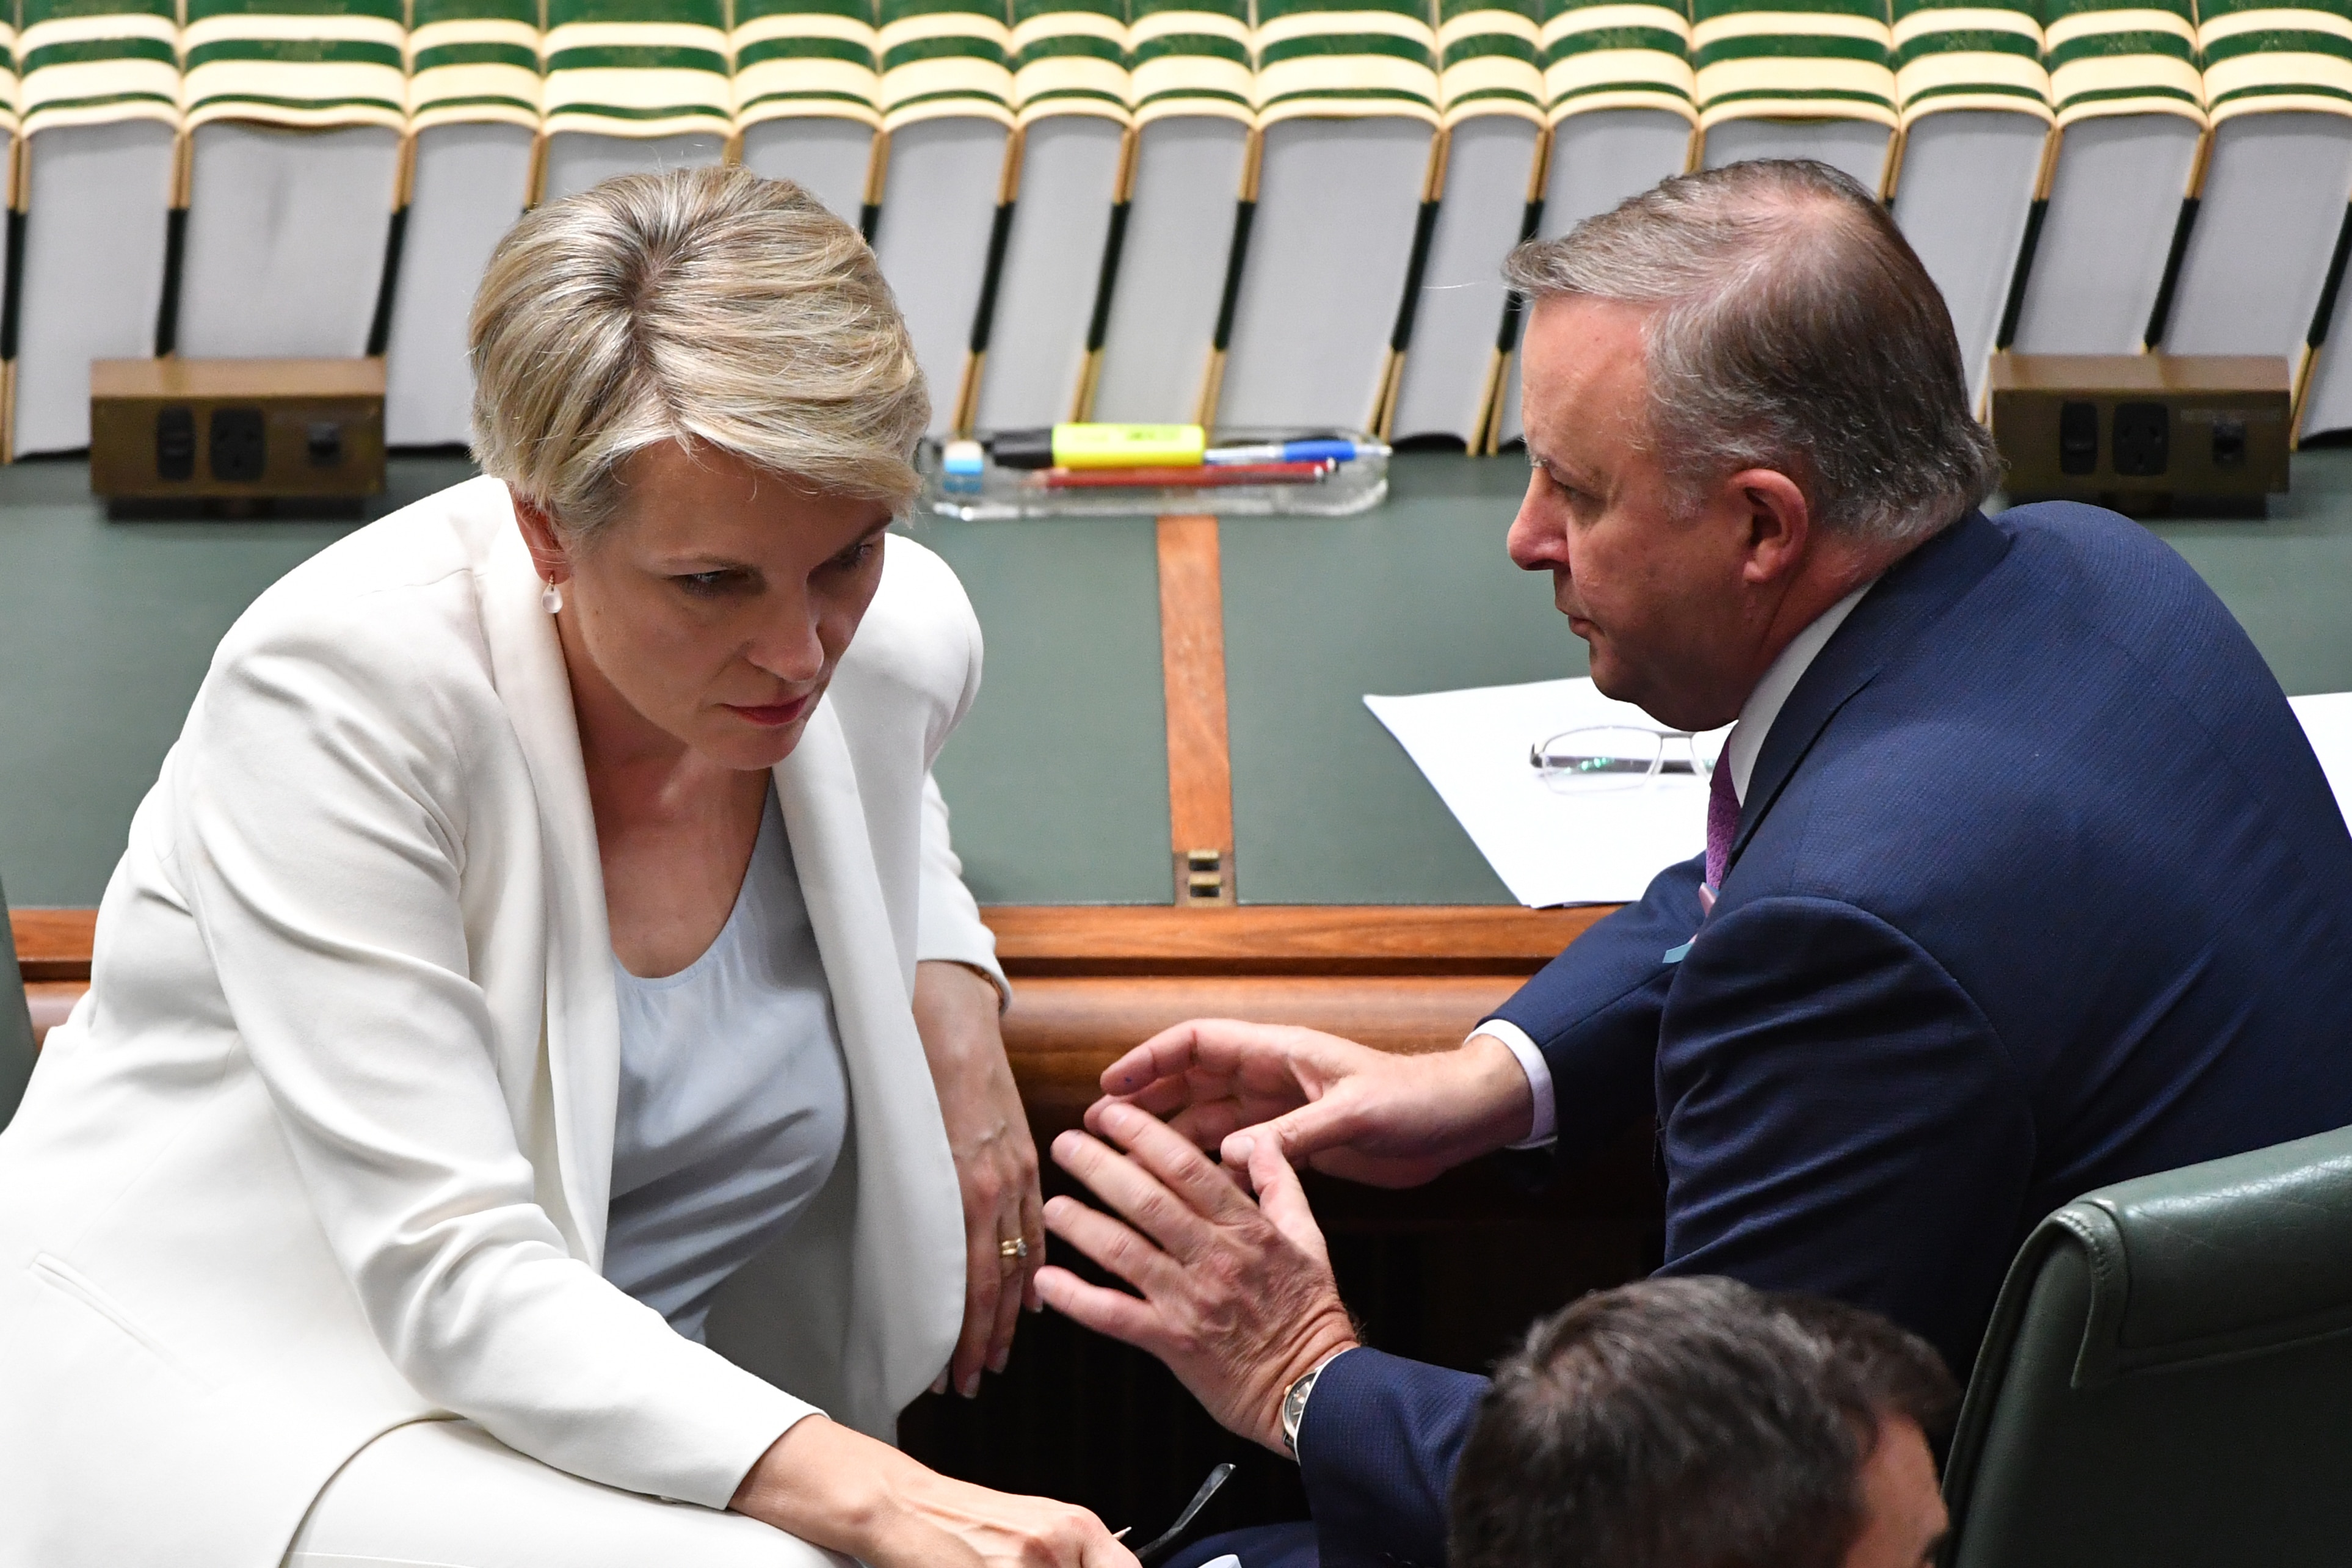 Labor's Tanya Plibersek and Leader of the Opposition Anthony Albanese during Question Time.